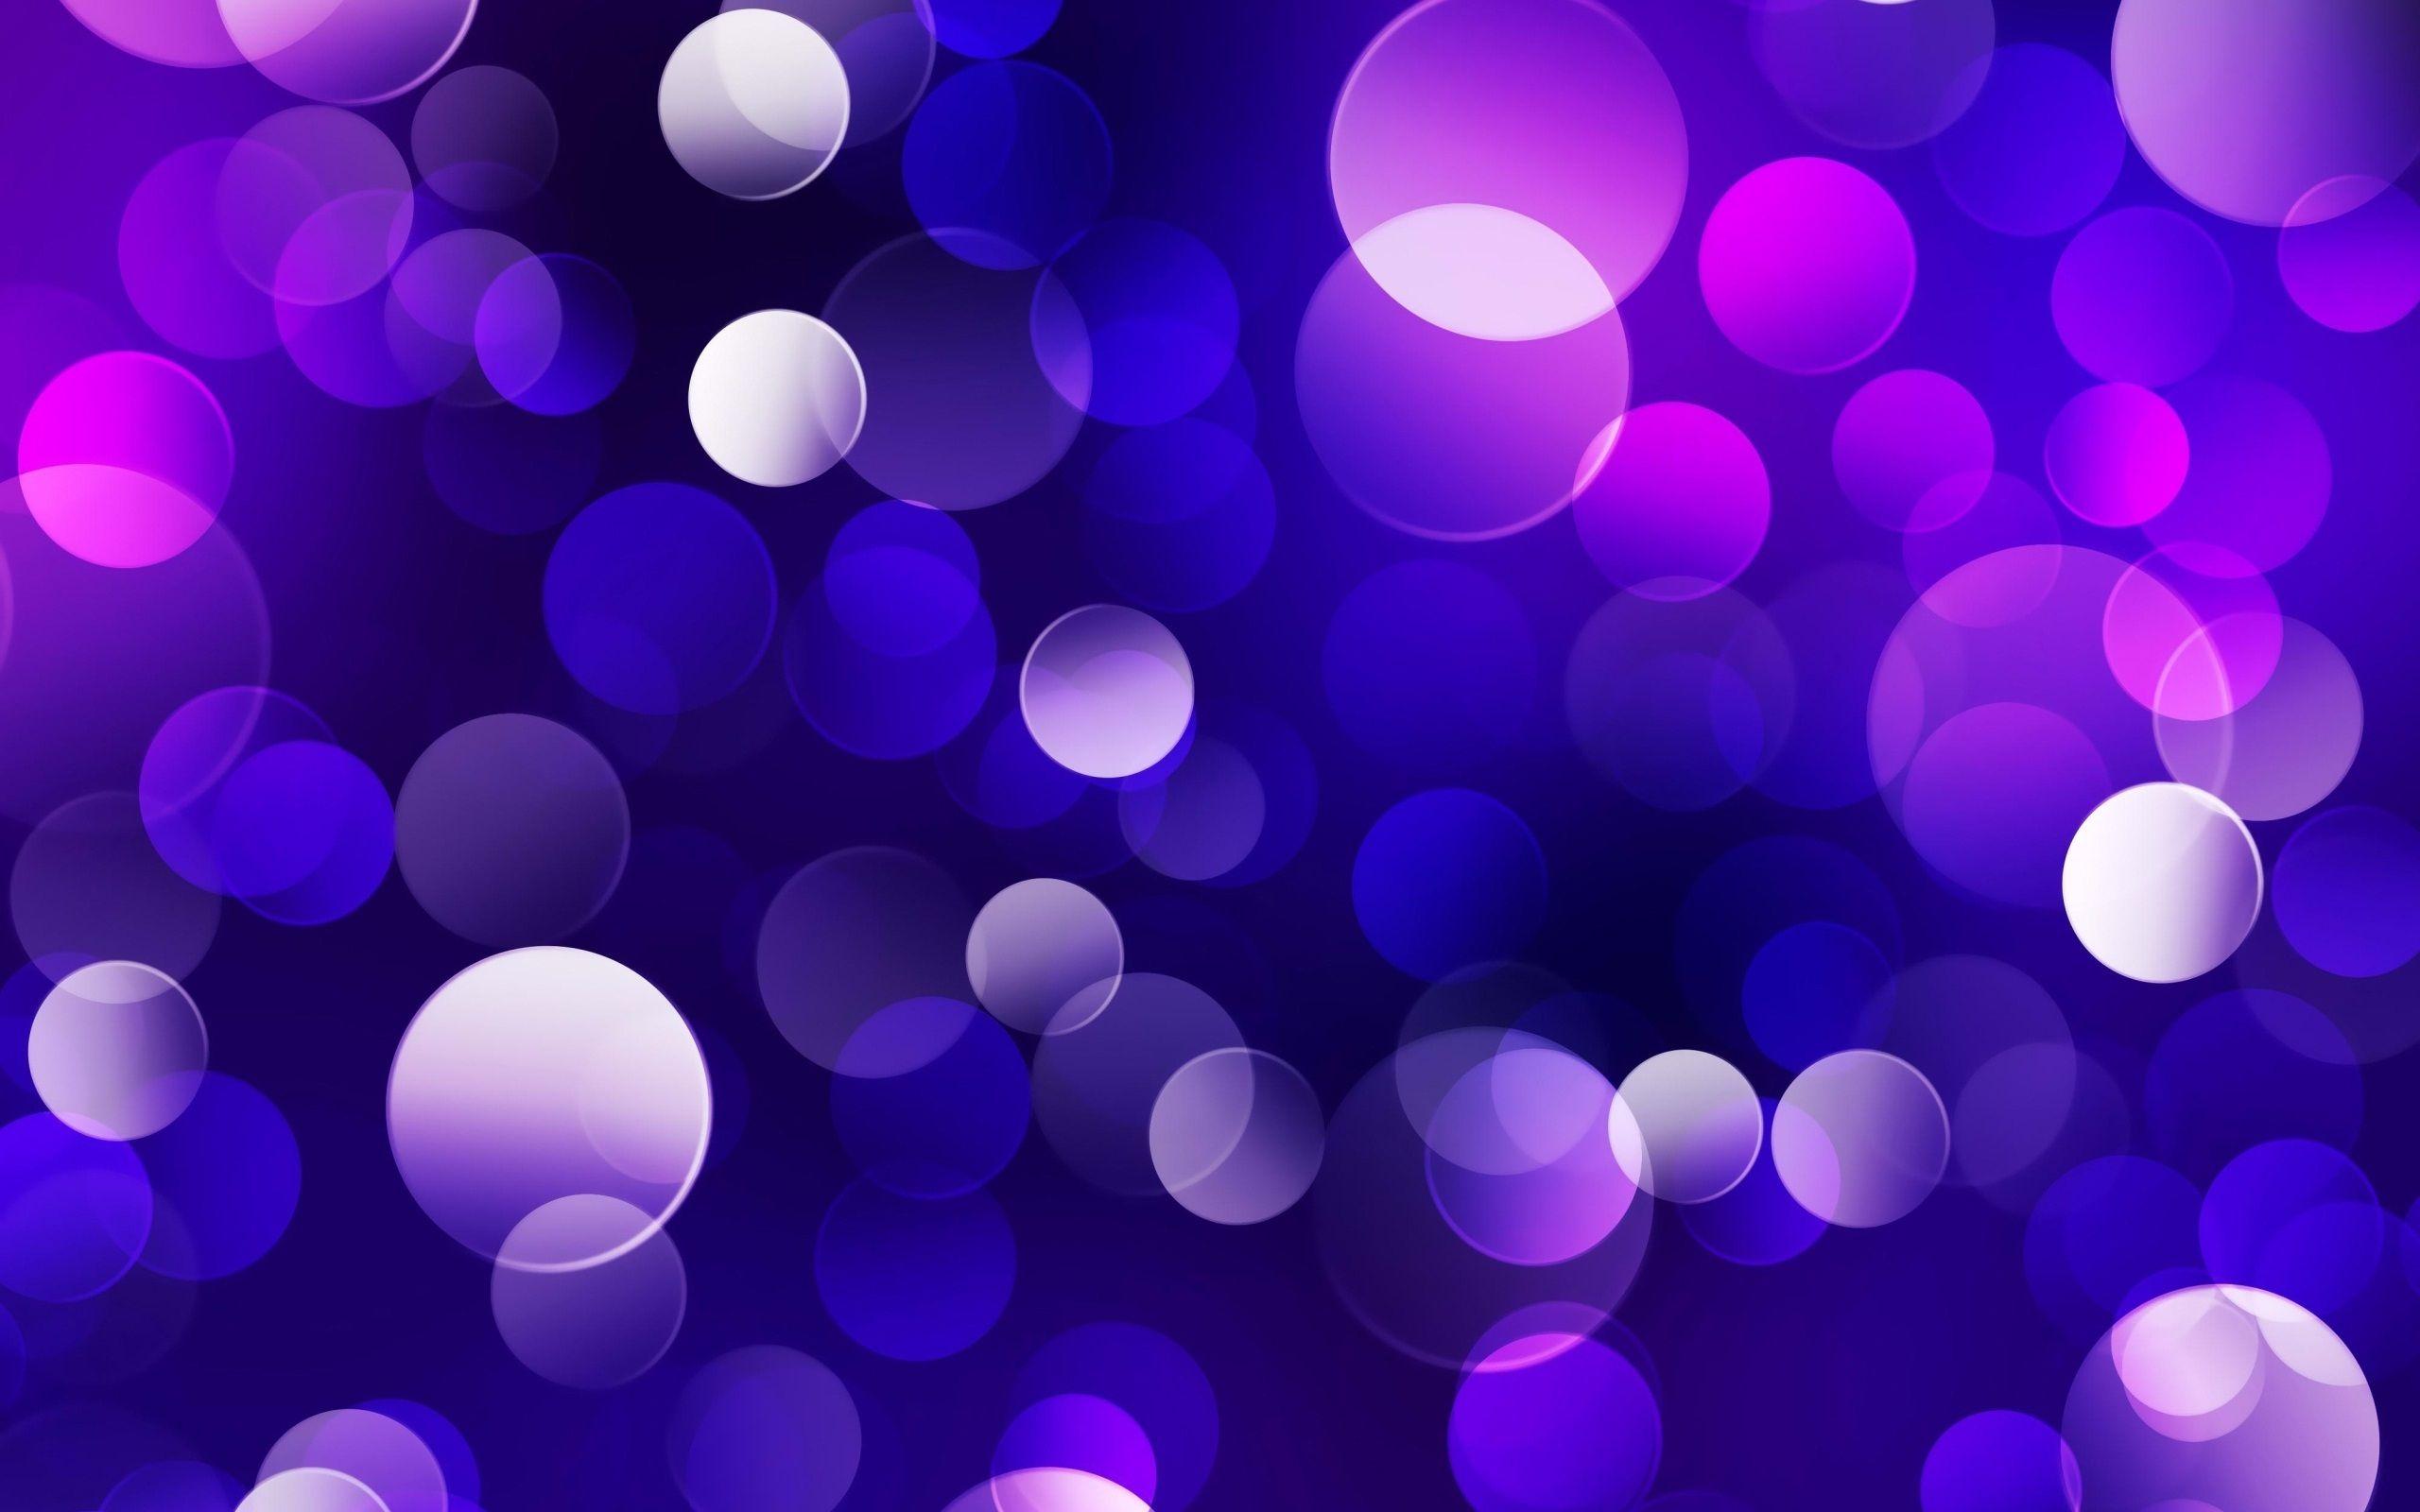 Wallpaper For > Background Wallpaper Abstract Purple